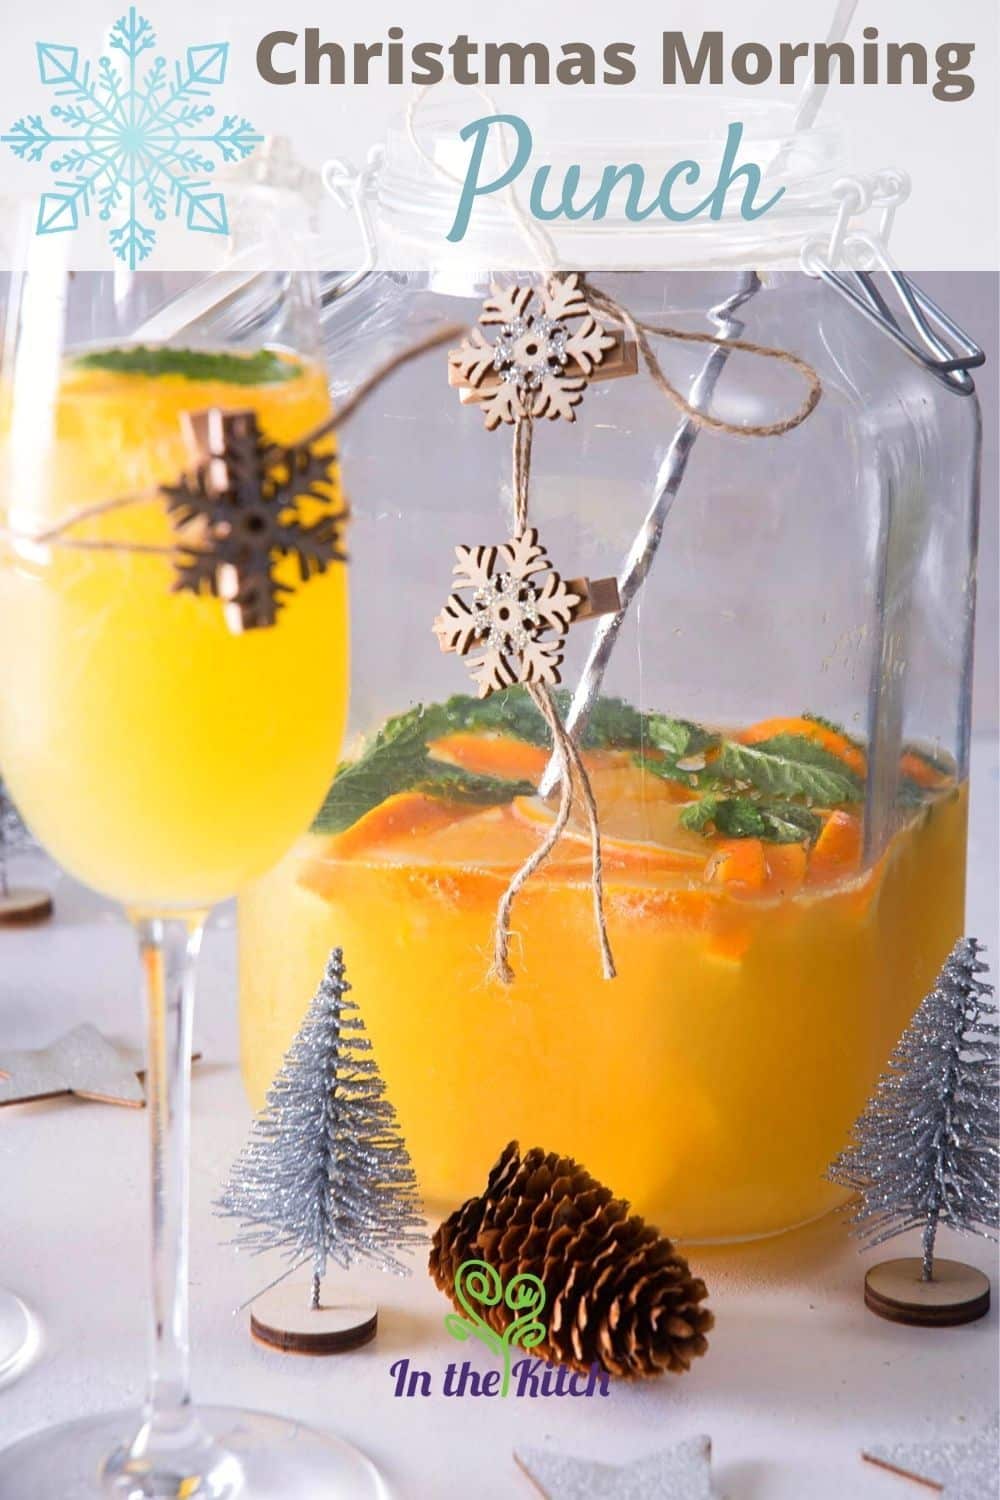 Christmas punch in a pitcher and champagne glass with Christmas decorations.